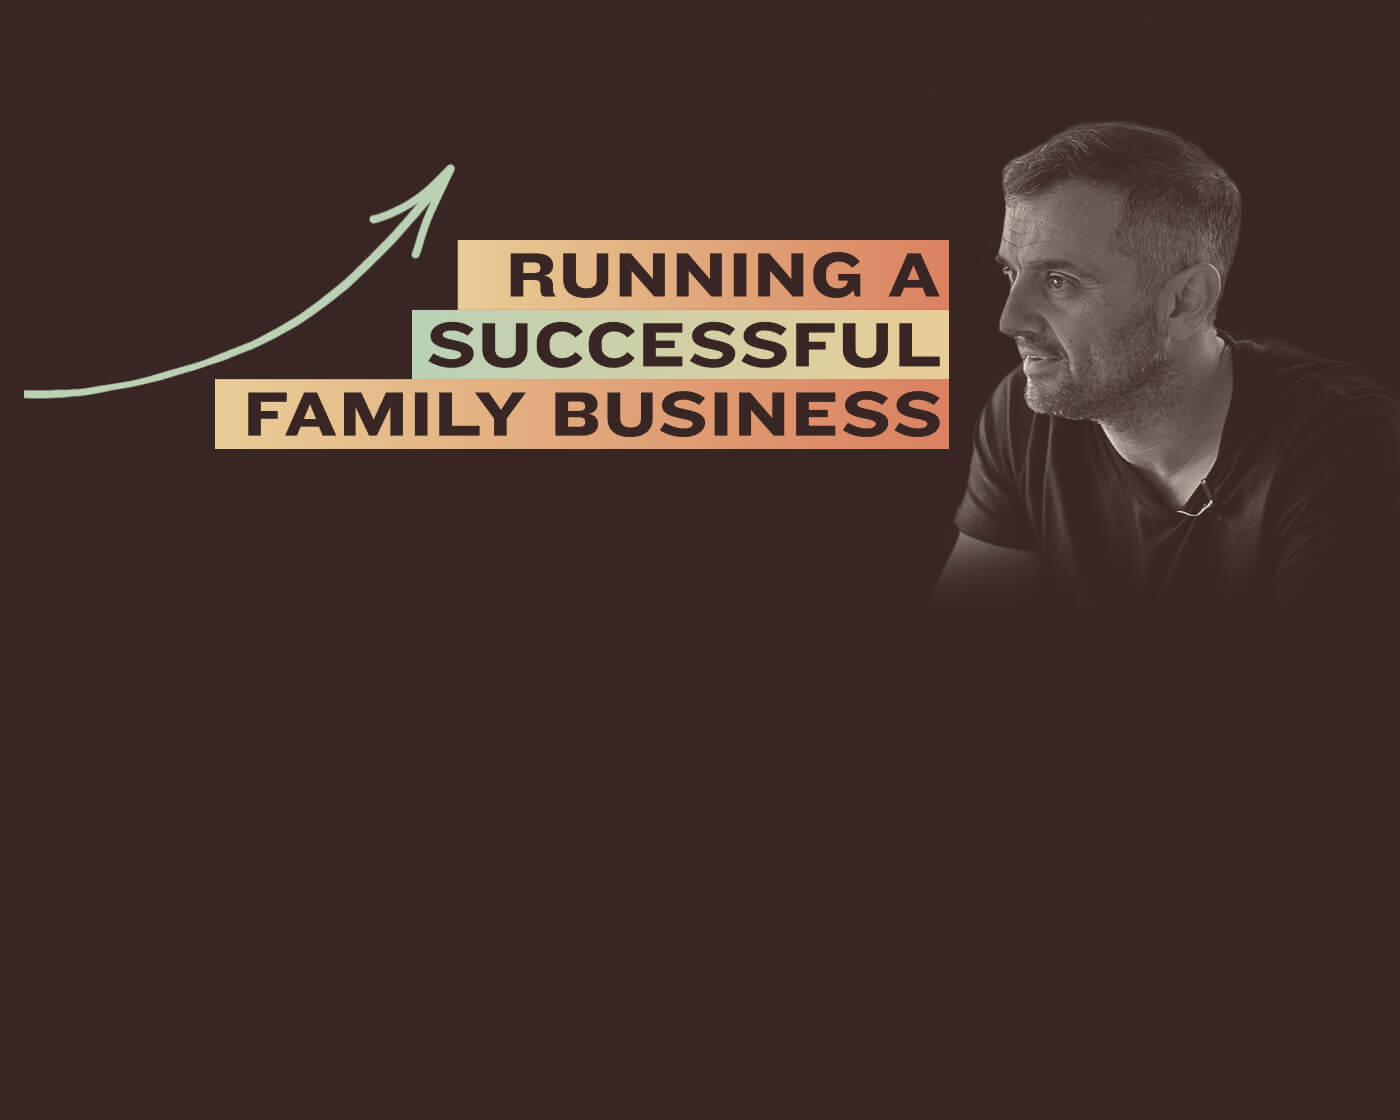 3 Tips for Running a Successful Family Business